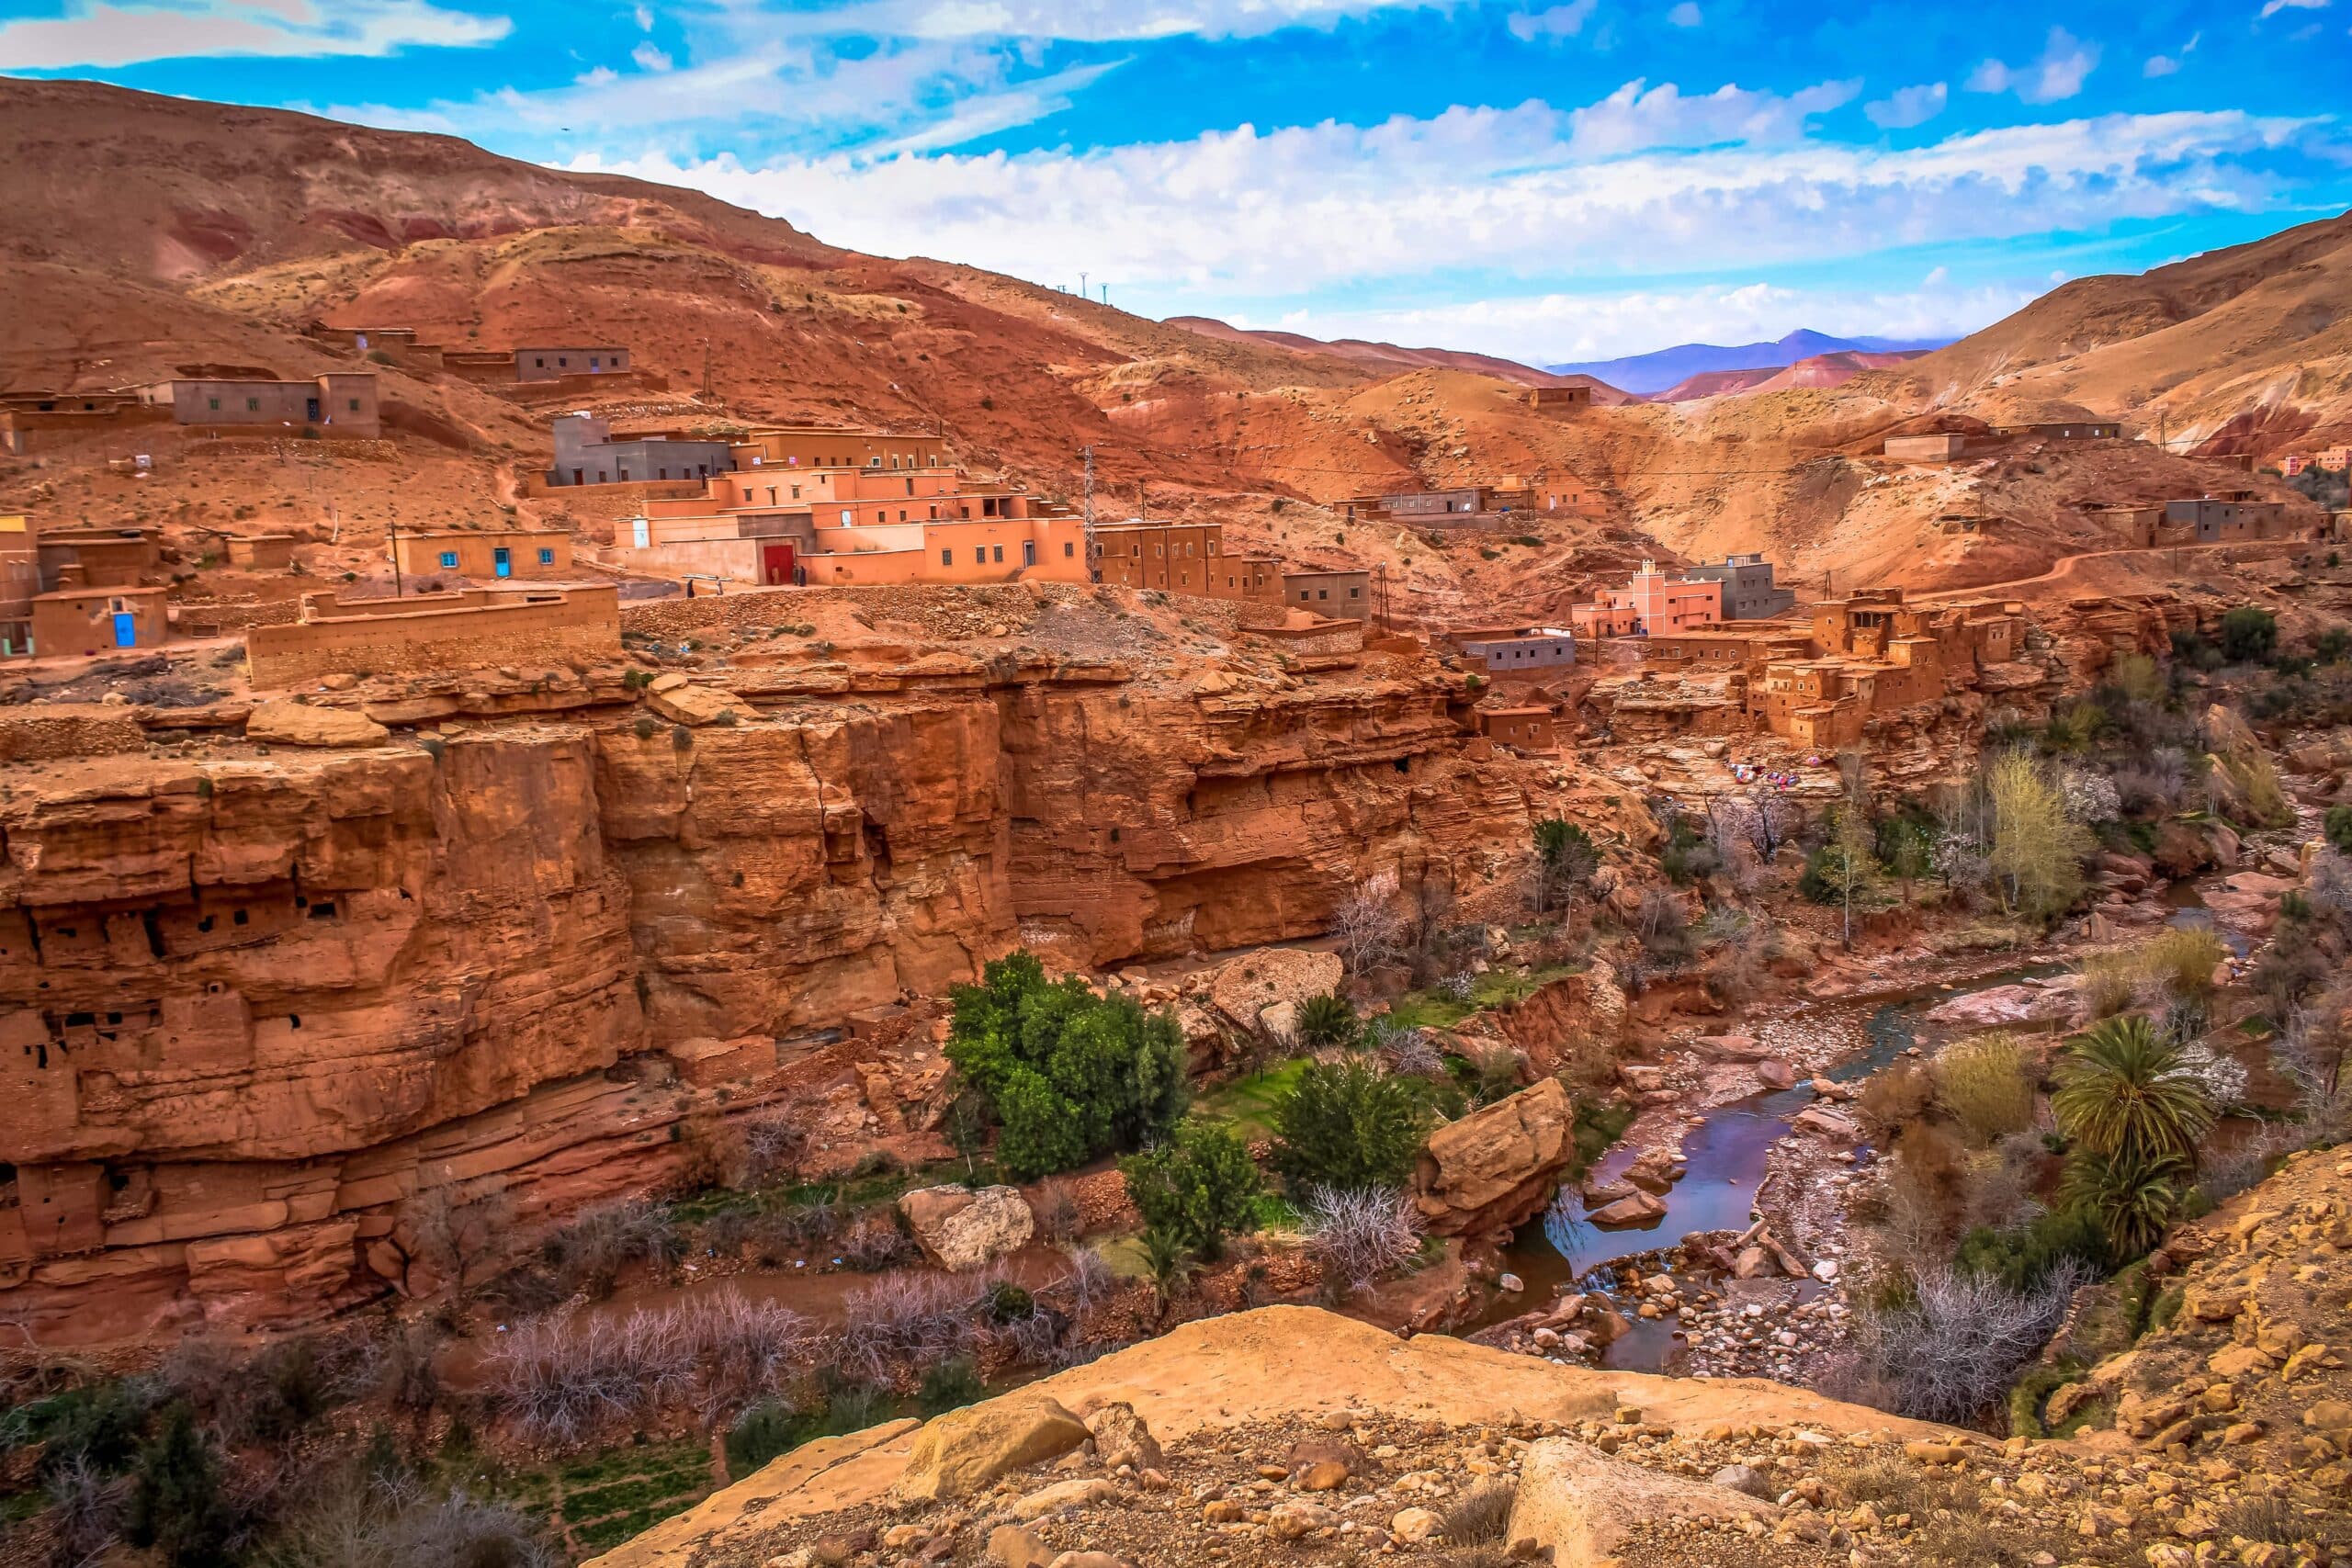 Traditional Berber village in the Atlas Mountains.